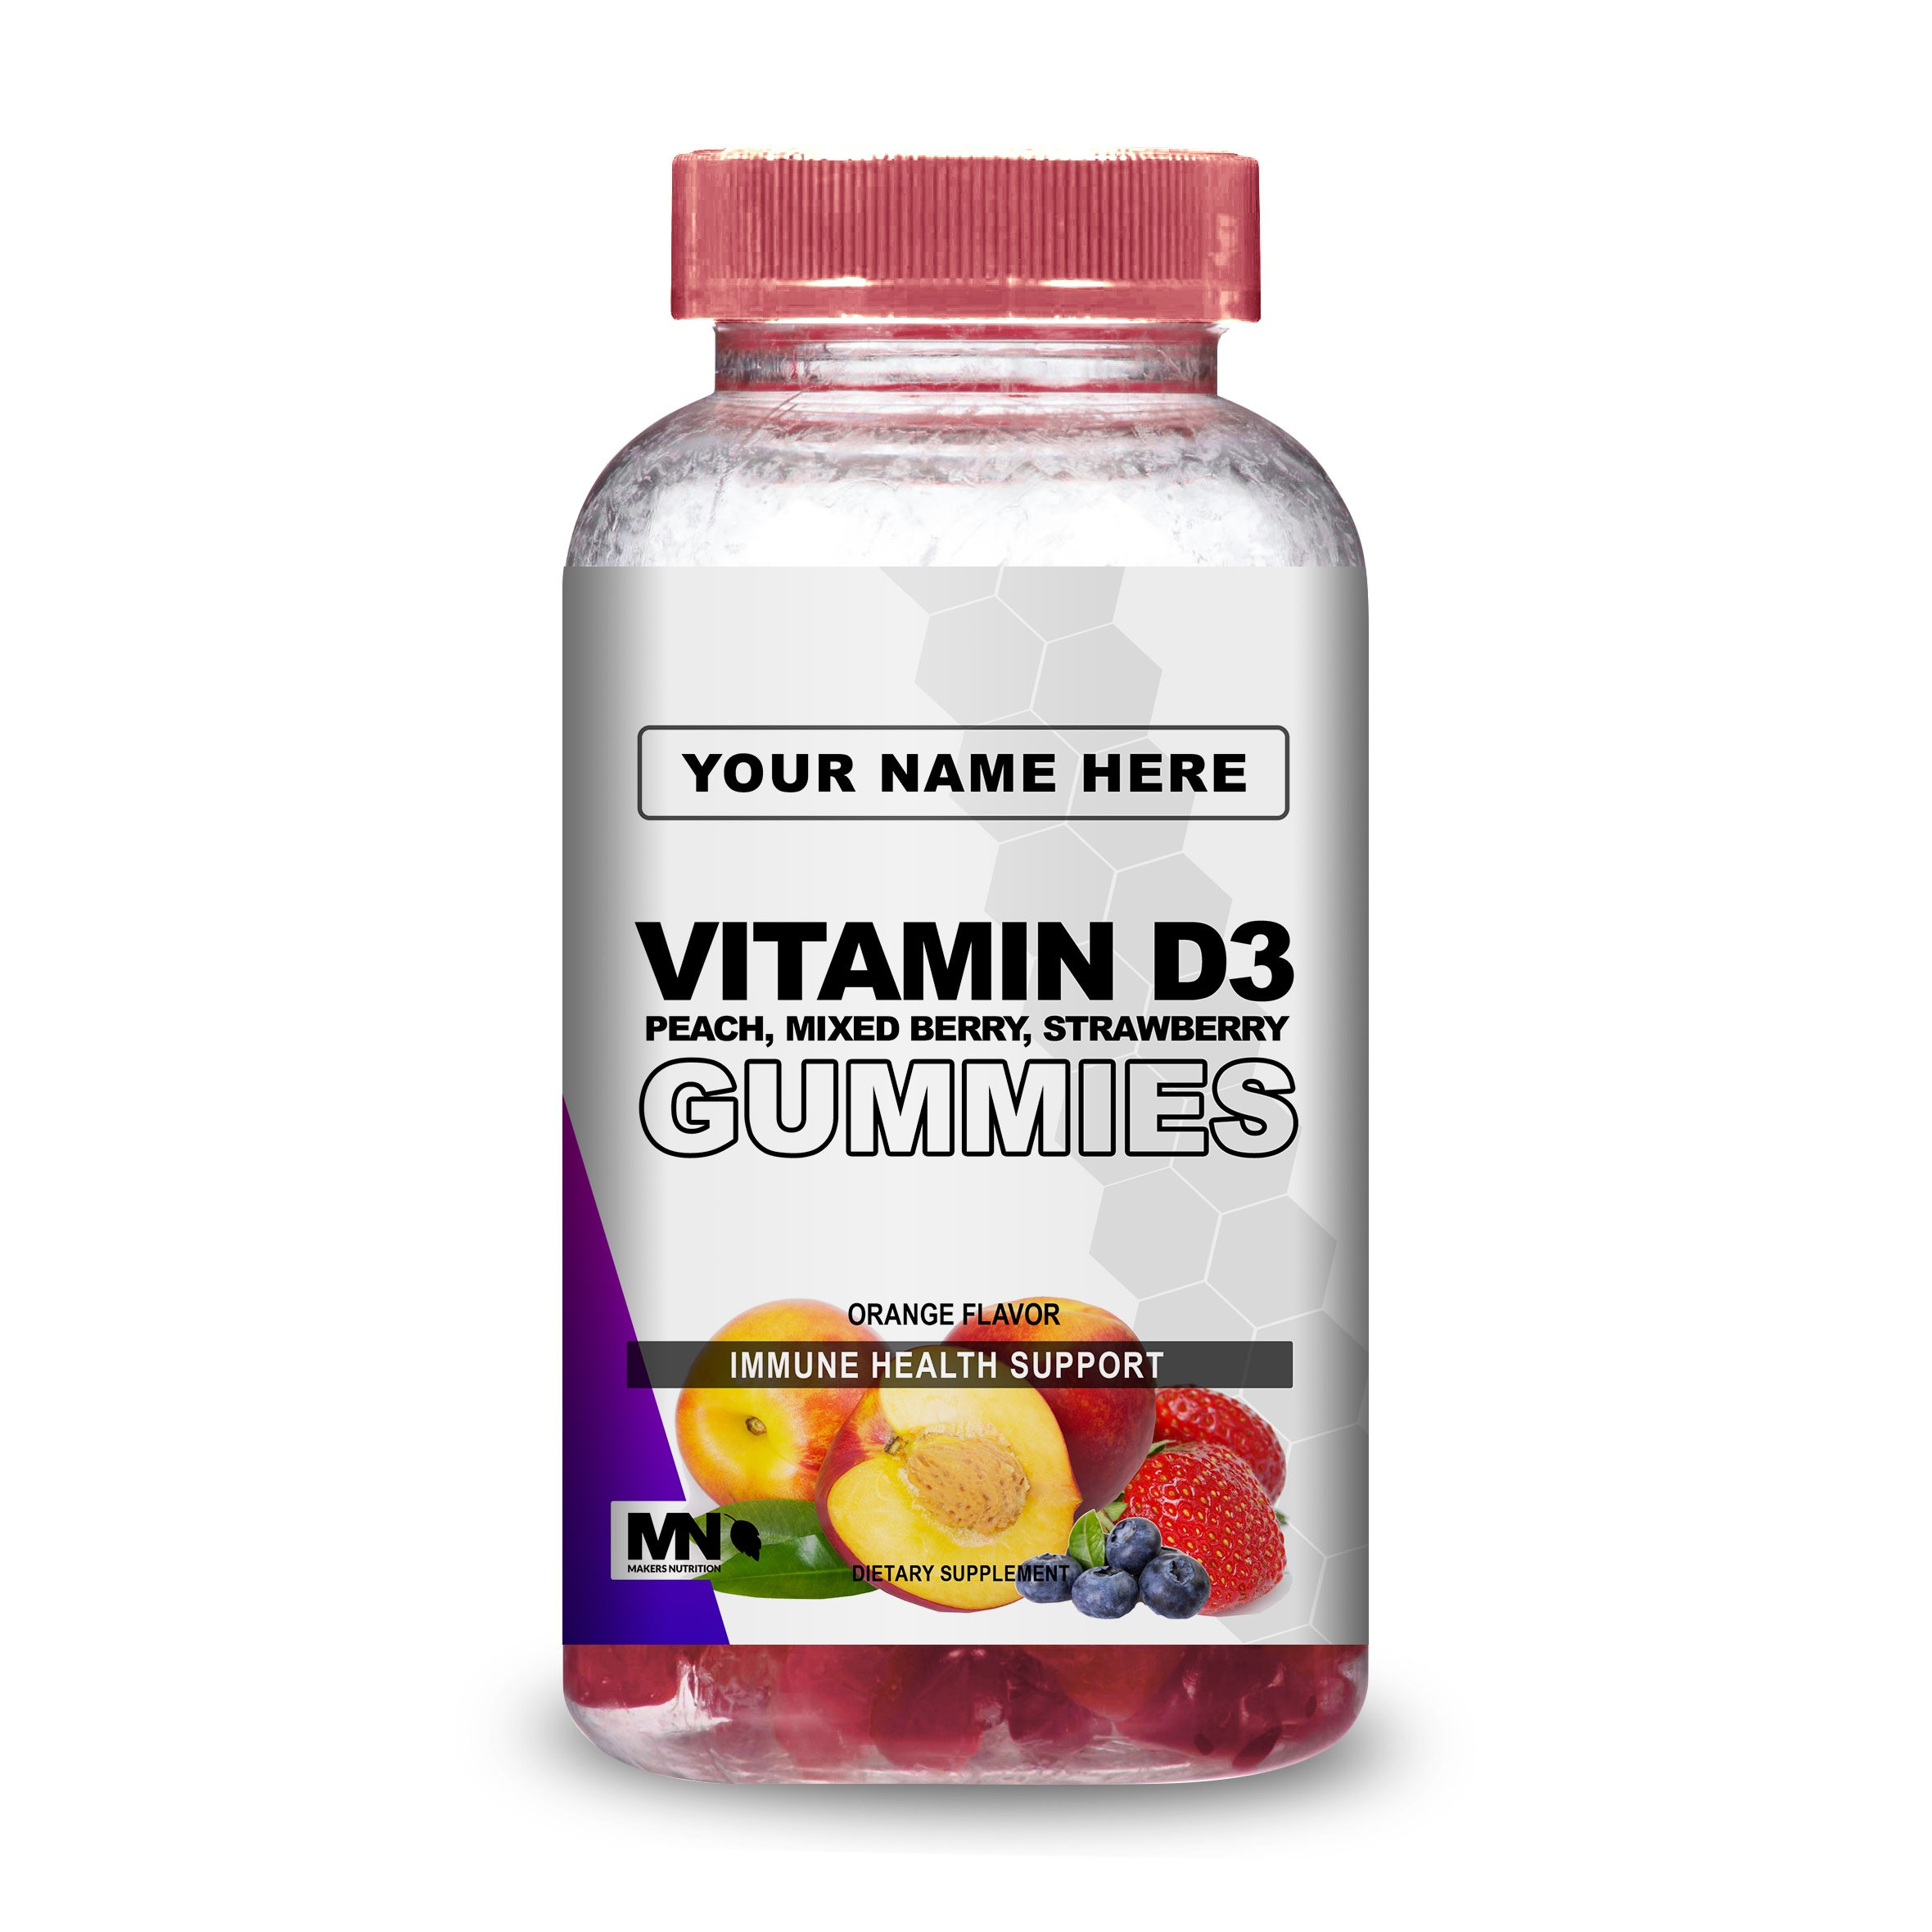 Vitamin D3 Peach, Mixed Berry and Strawberry Gummies